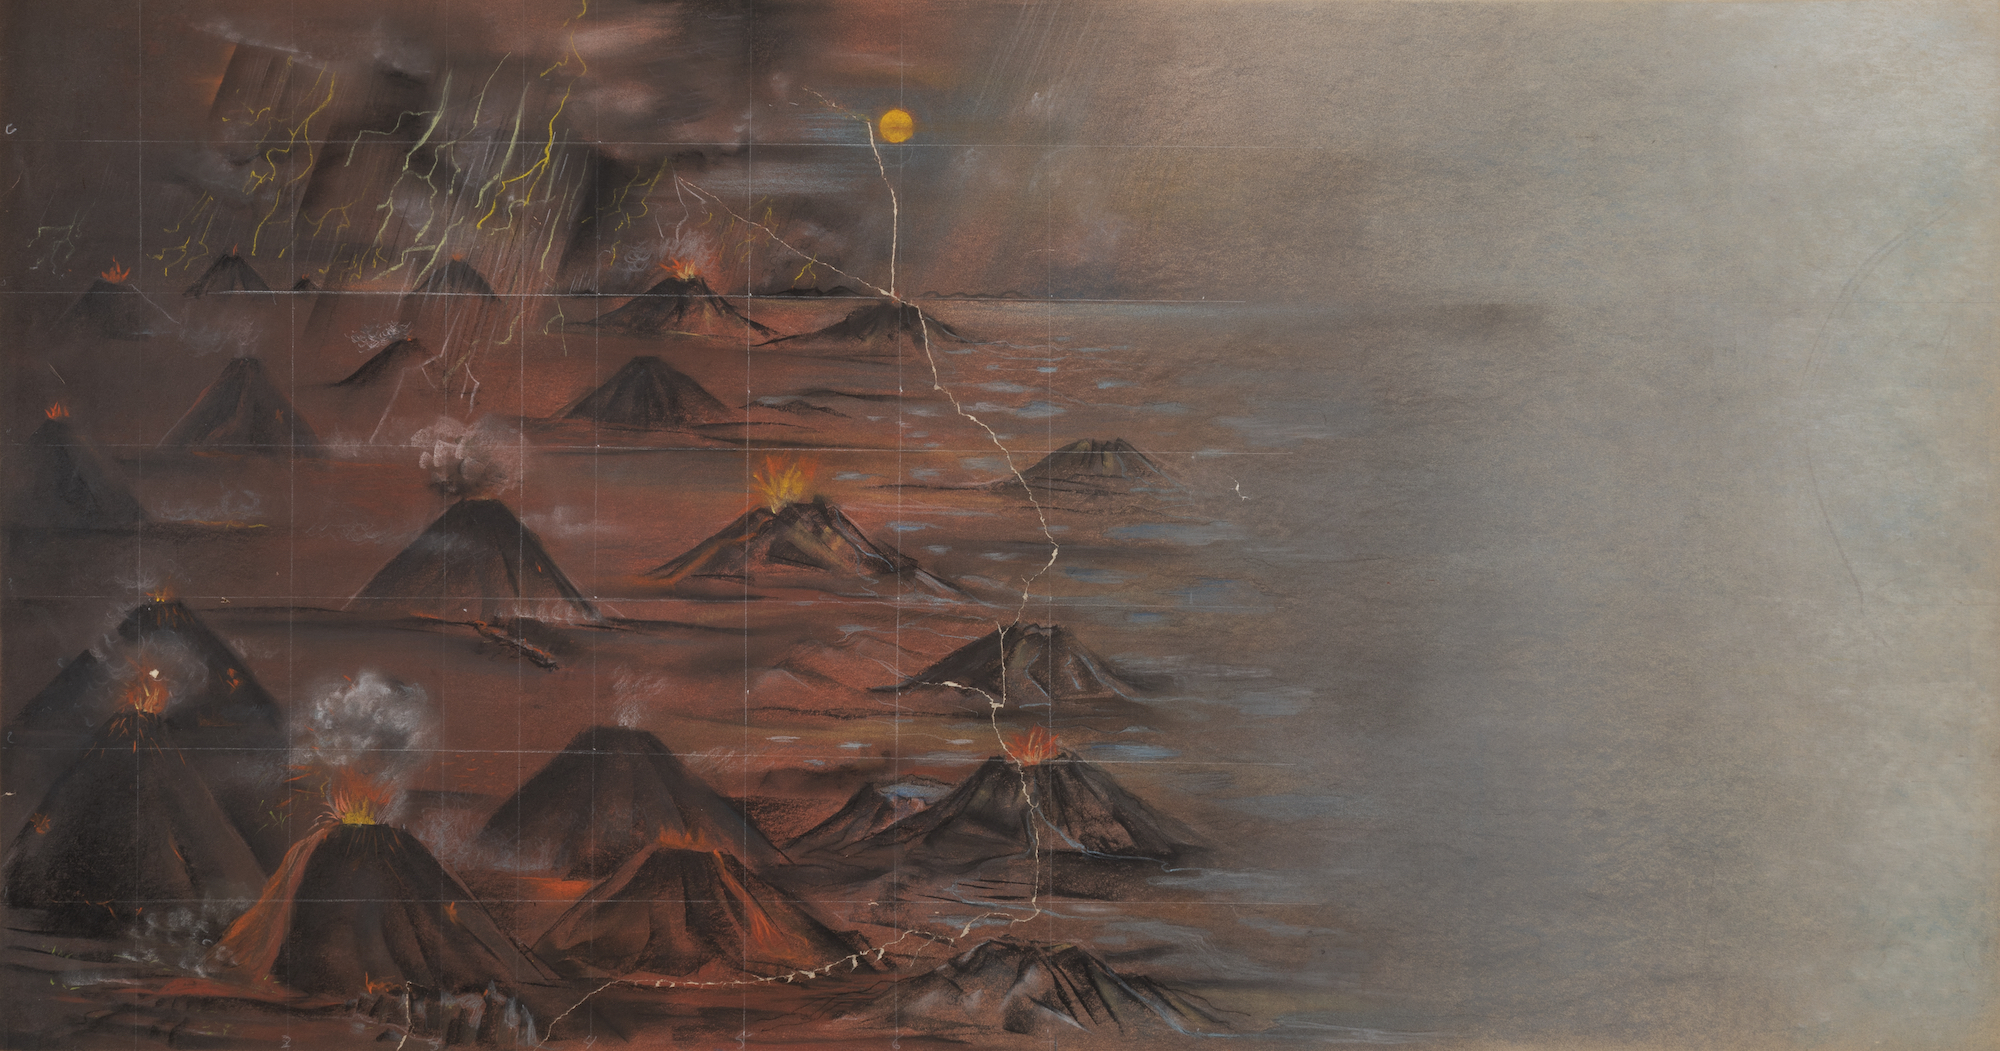 A pastel study of Charles Alston's Origin of Life Mural, which depicts a field of volcanos next to a body of water.